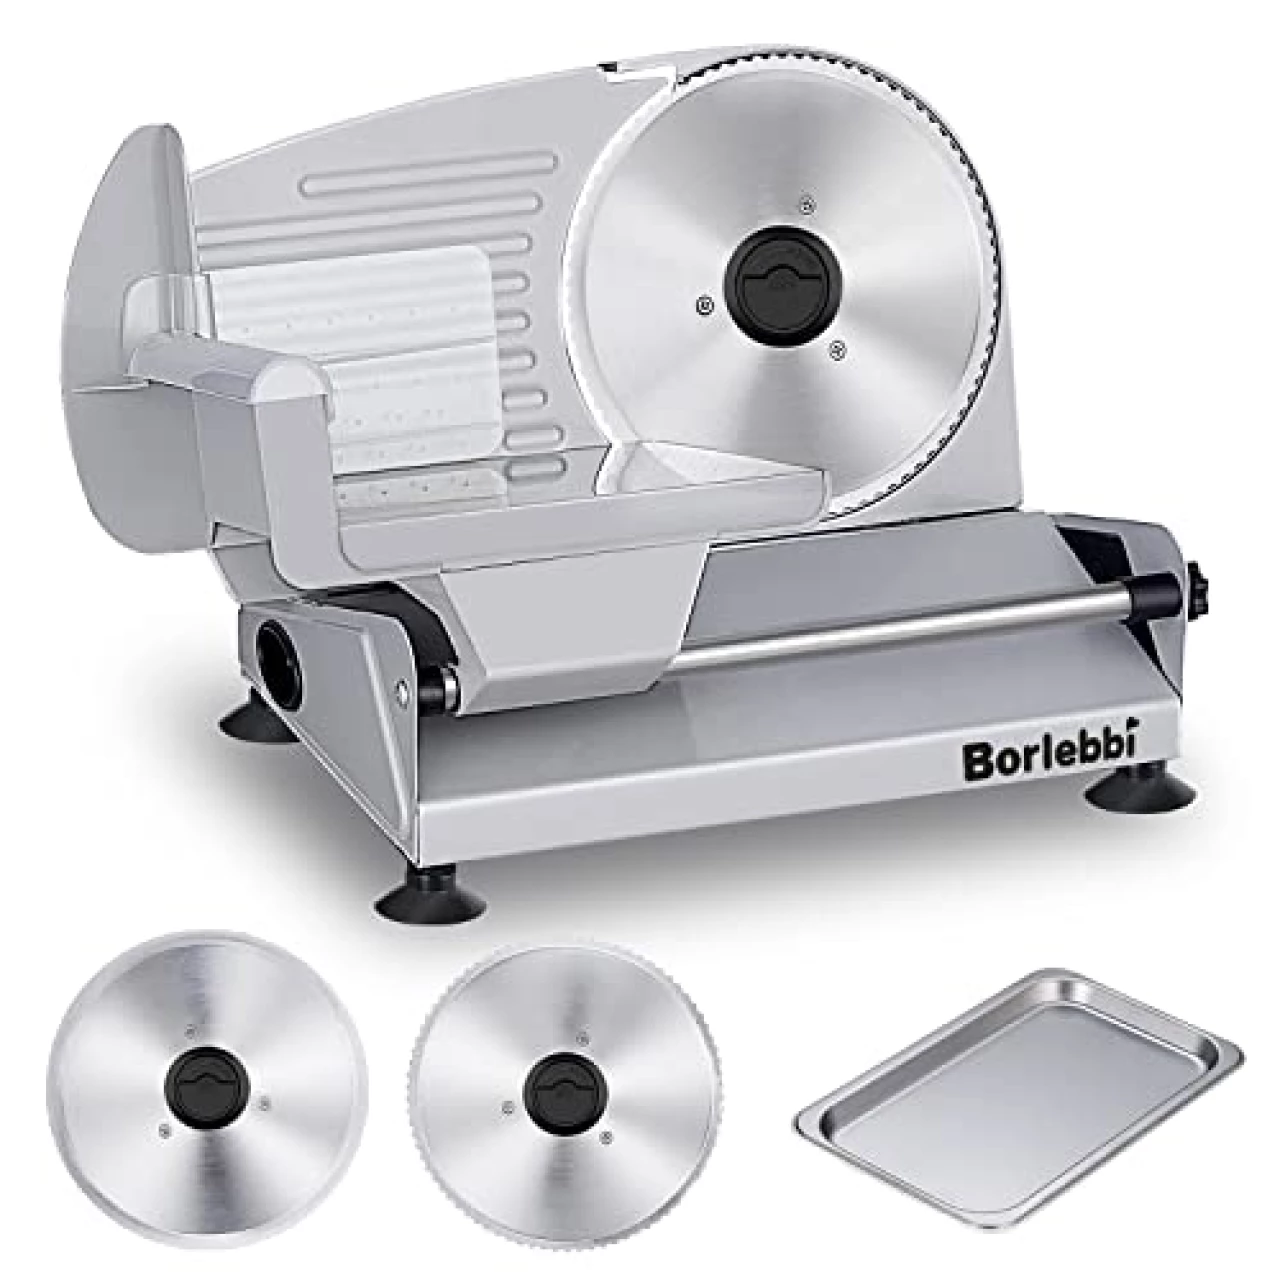 Meat Slicer, 200W Electric Food Slicer with 2 Removable 7.5&quot; Stainless Steel Blades &amp; One Stainless Steel Tray, Child Lock Protection, Adjustable Thickness, Food Slicer Machine for Meat Cheese Bread